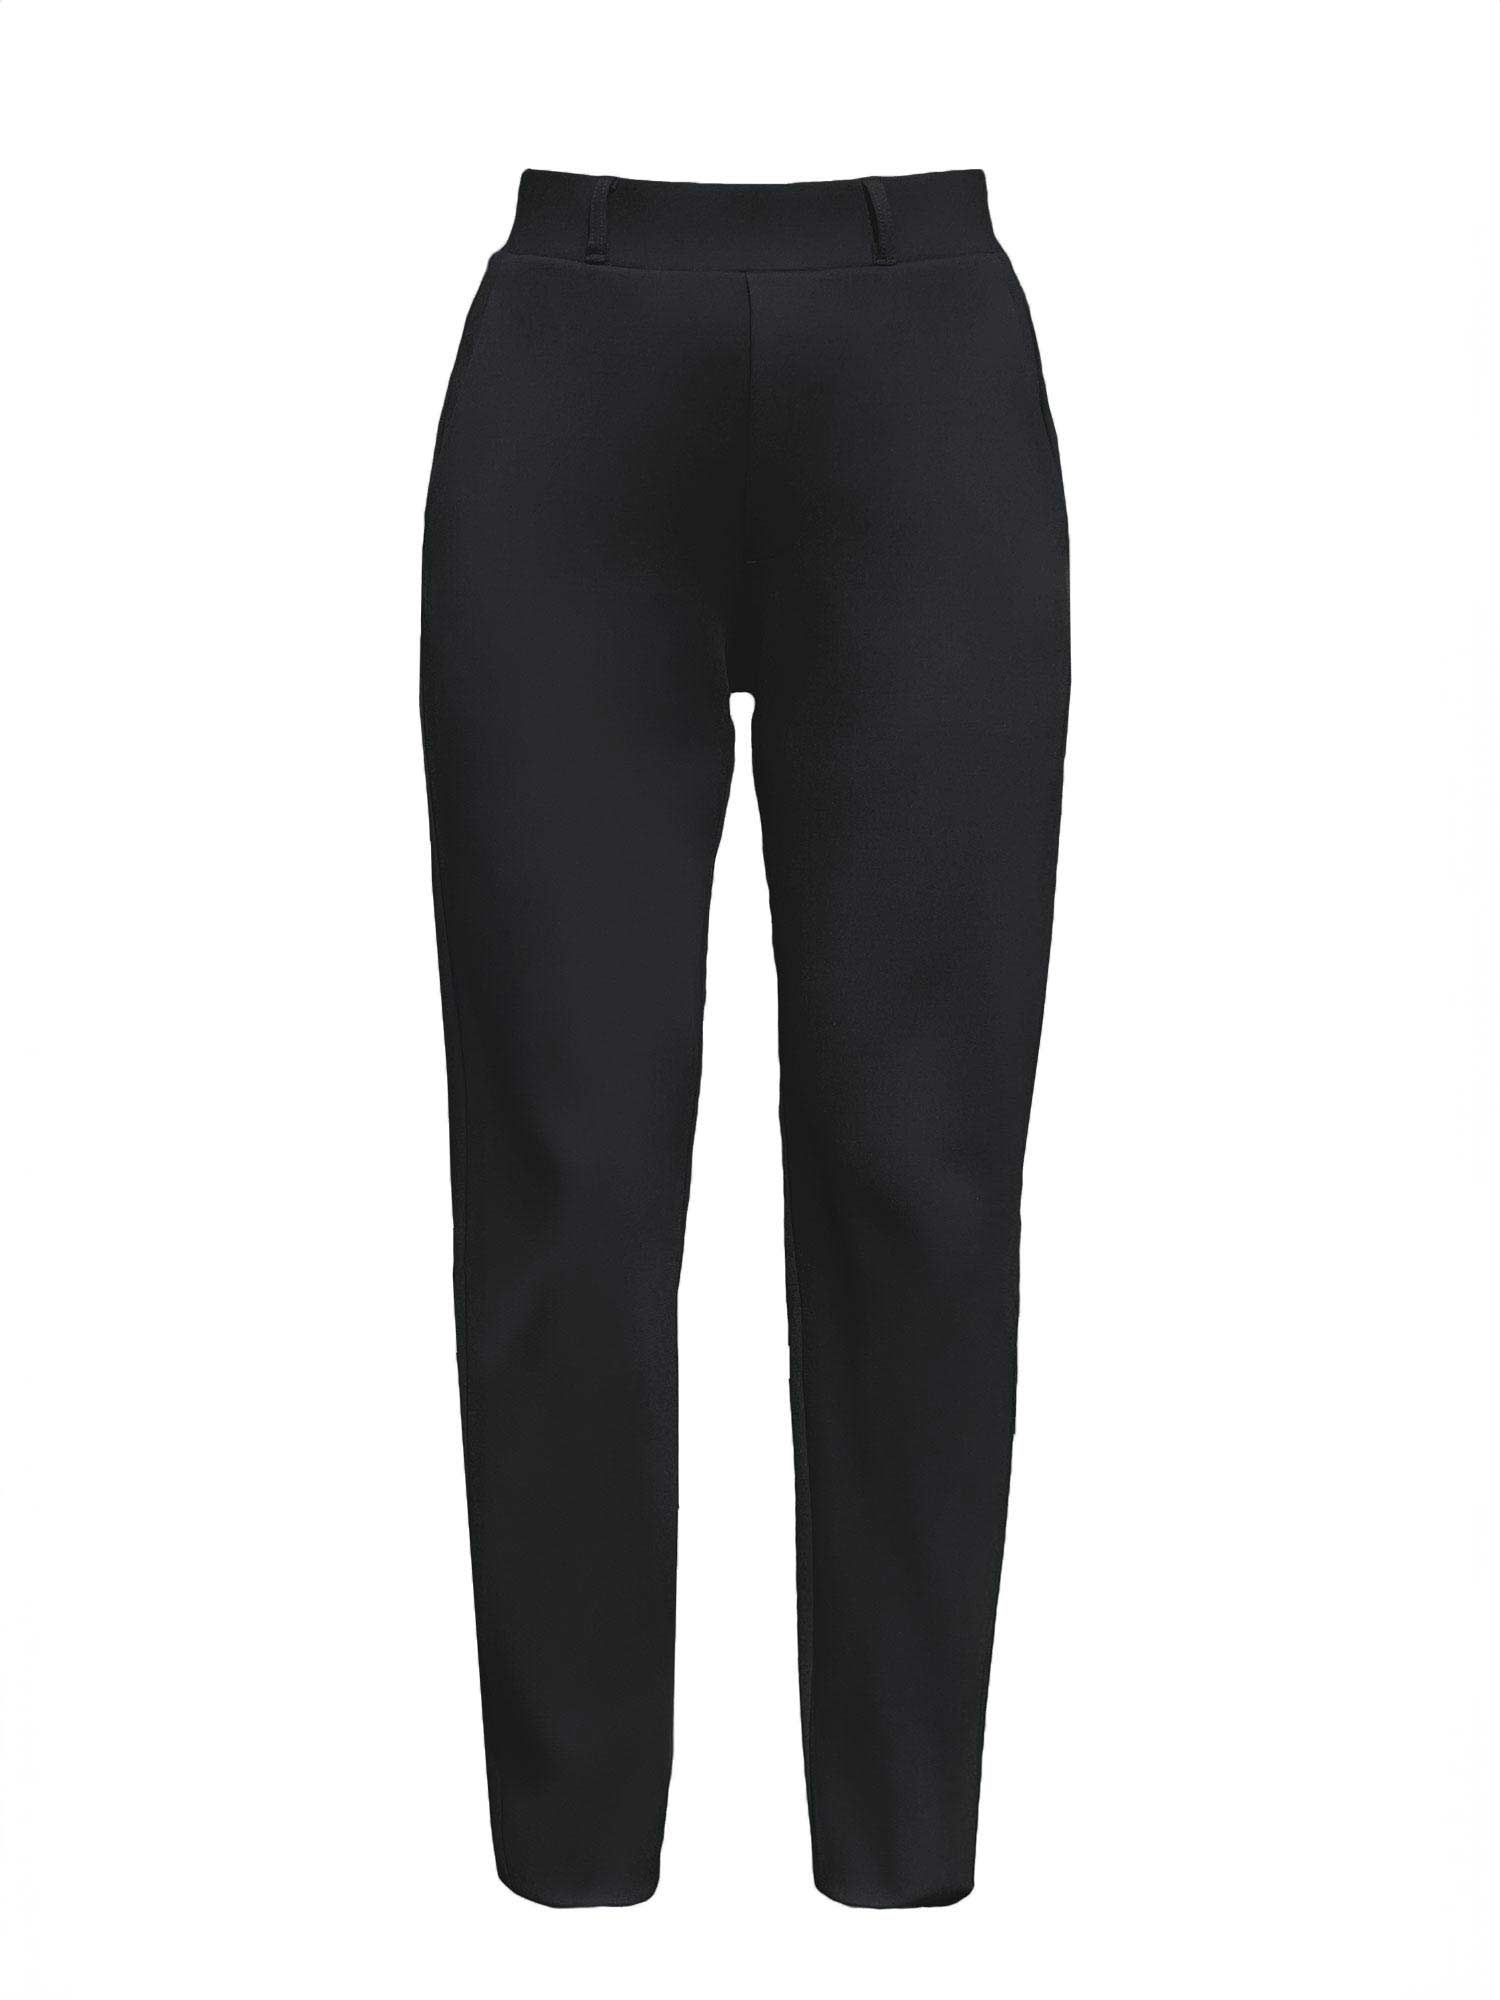 Keltie ponte mid-rise slim pant, Sustainable women's clothing made in  Canada